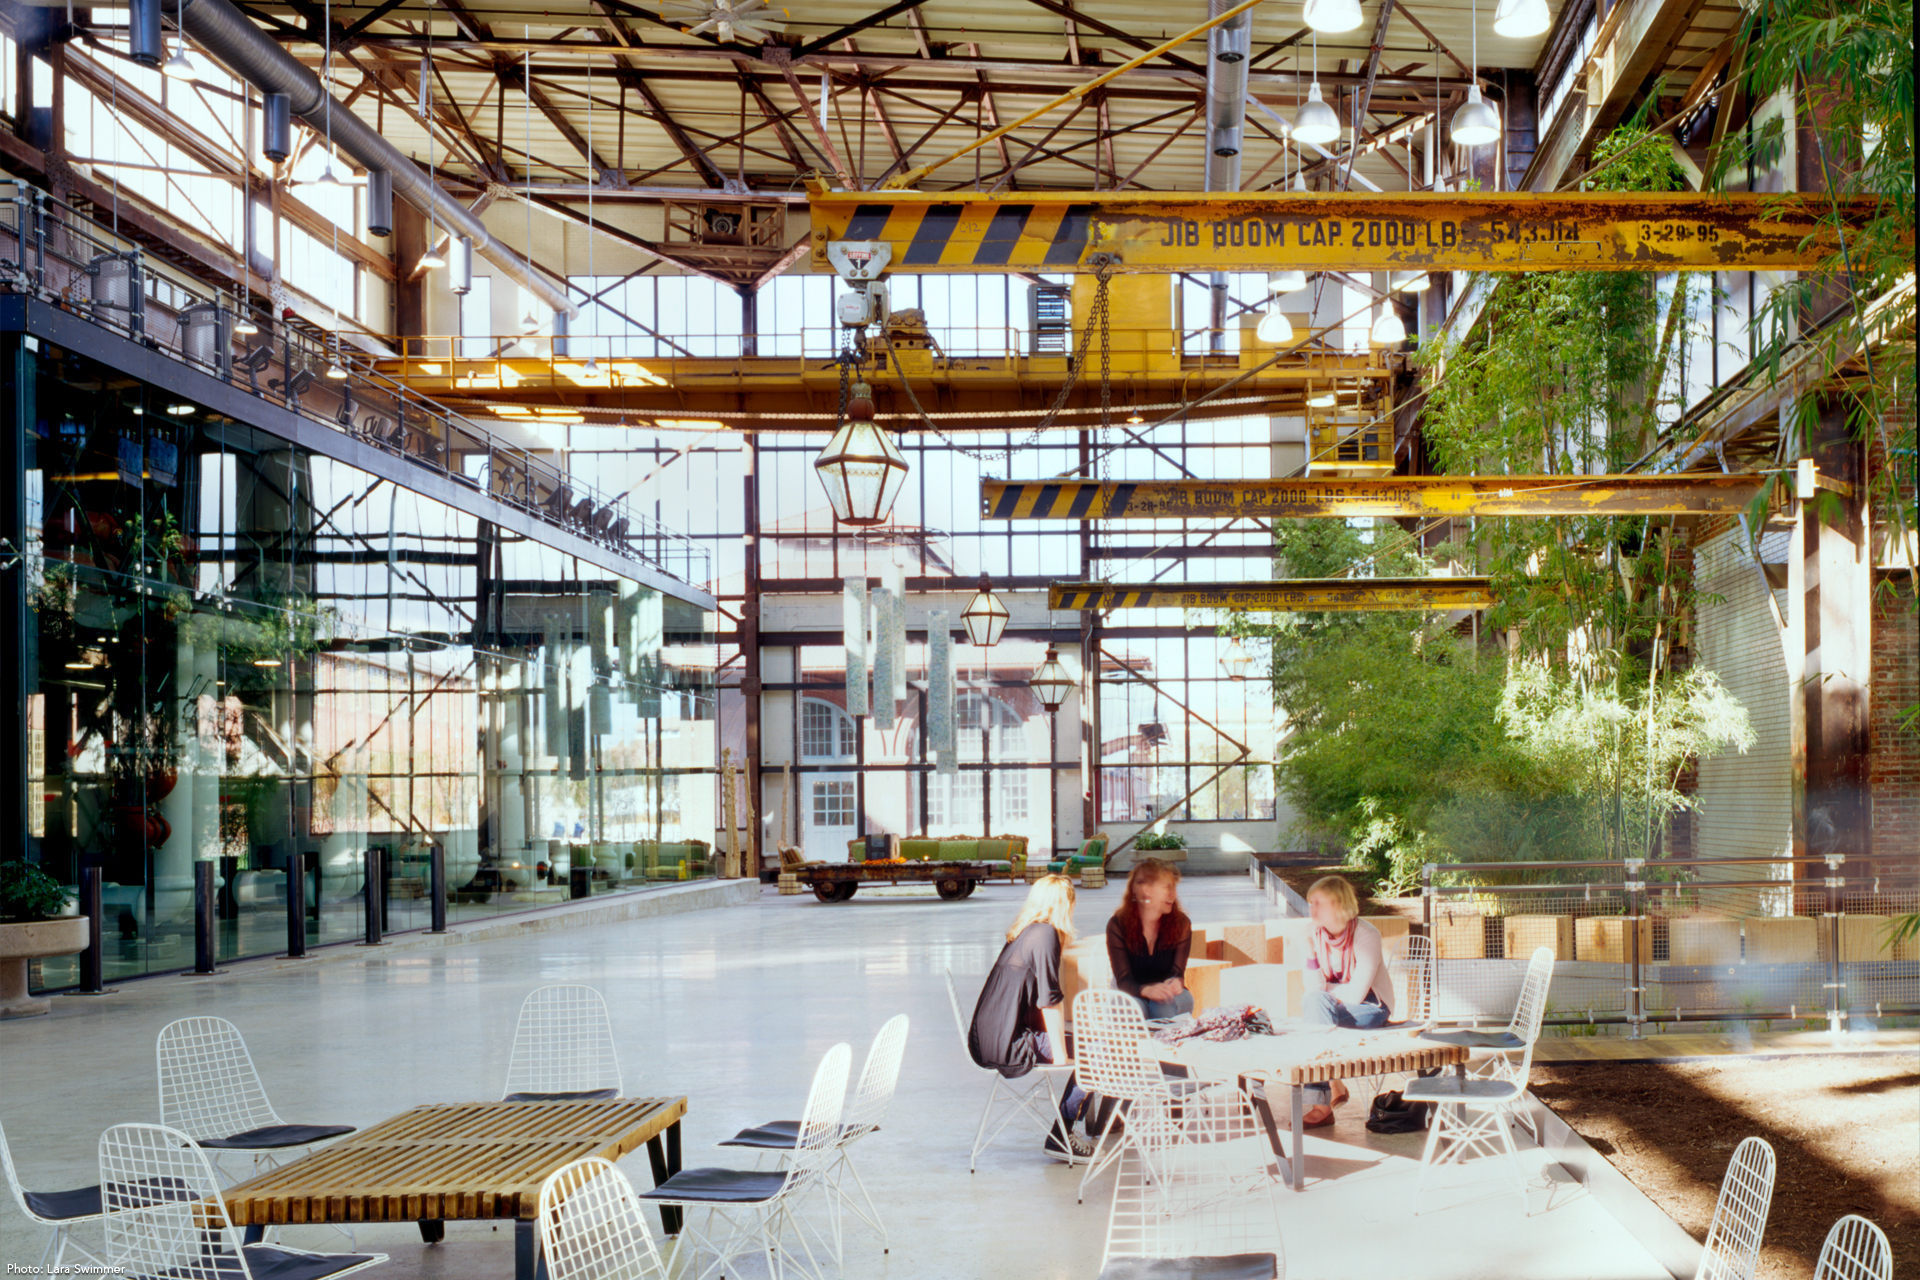 Urban Outfitters Corporate Campus MSR Design ArchDaily, 51% OFF